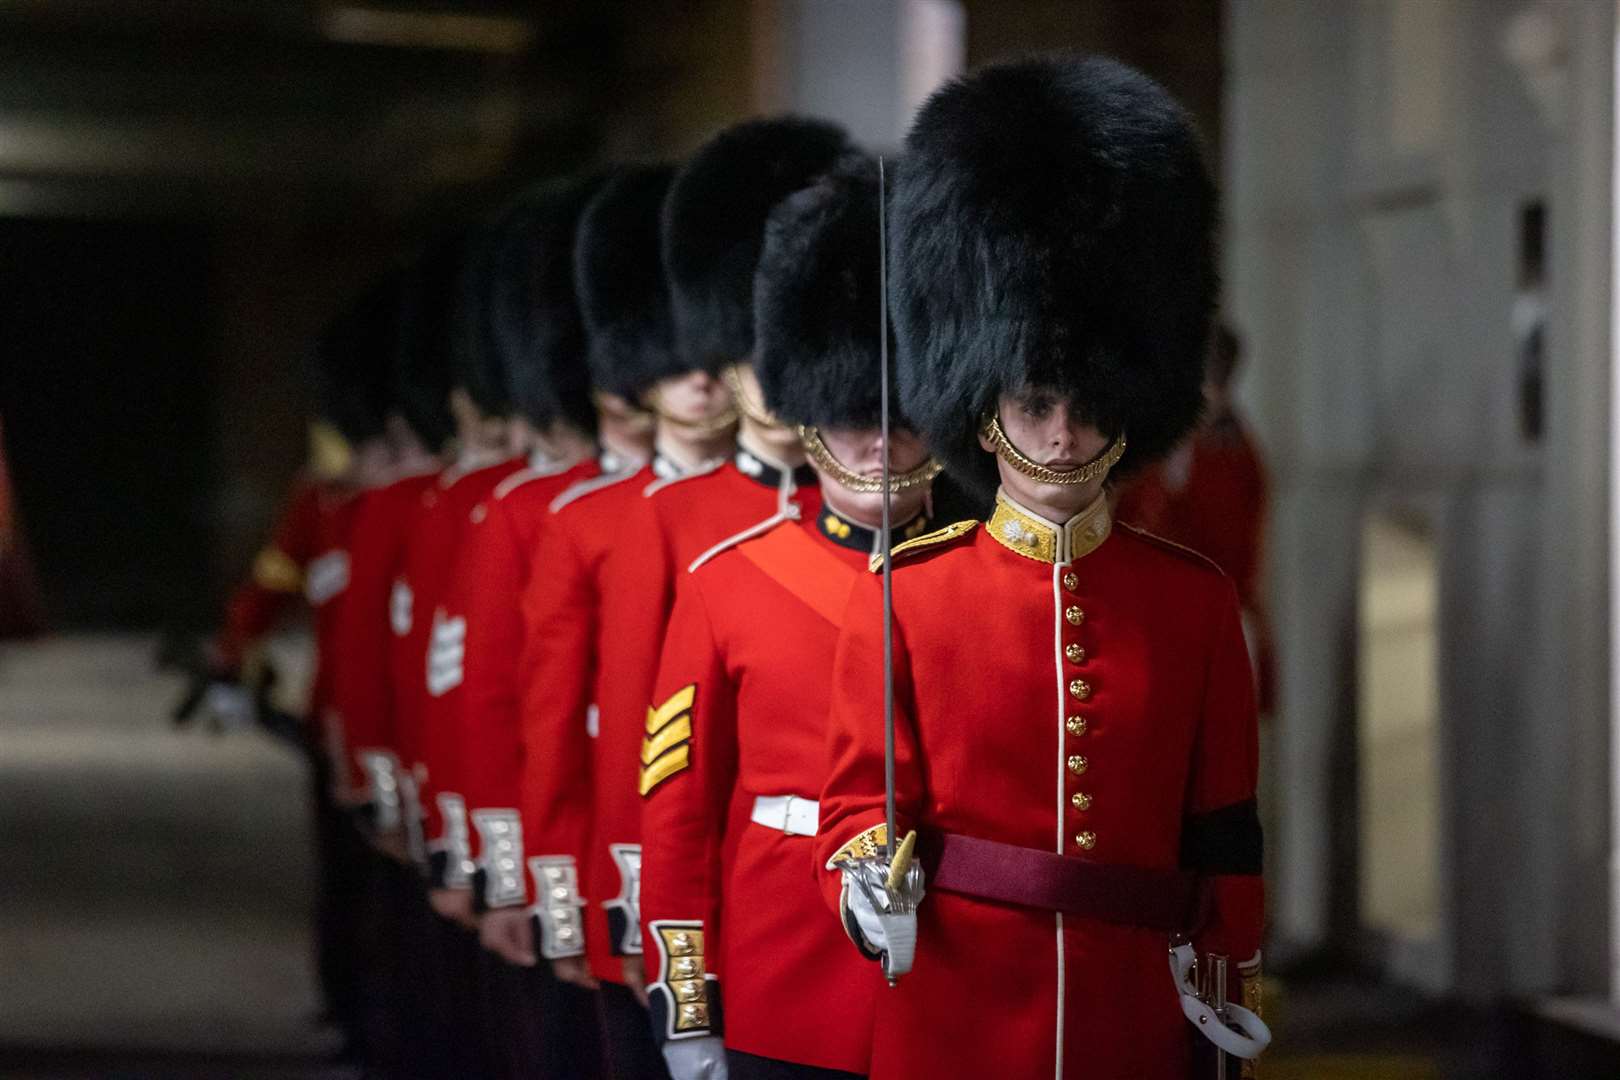 Members of the Grenadier Guards at Wellington Barracks, London, ahead of a final full dress rehearsal for the procession of the Queen’s coffin from Buckingham Palace to Westminster Hall (Corporal Paul Watson/MoD/PA)